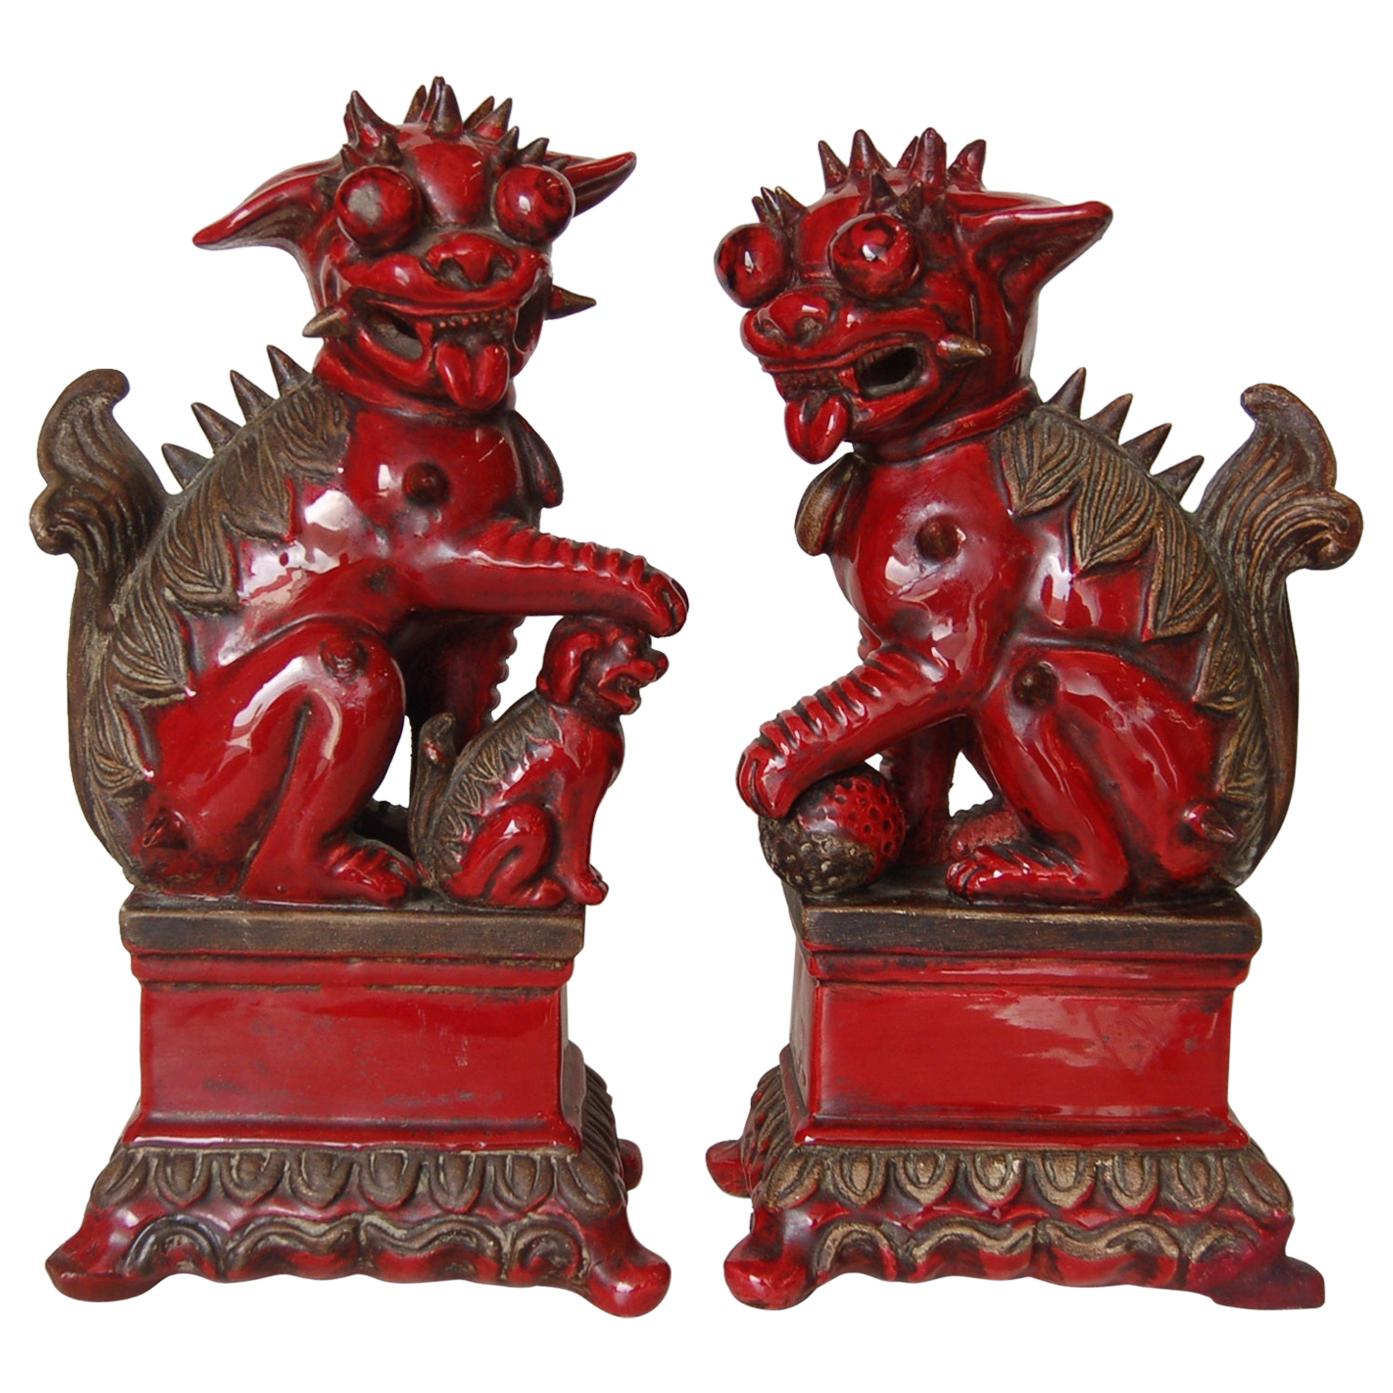 Pair of Antique Red Ceramic Chinese Flying Dragons Figures